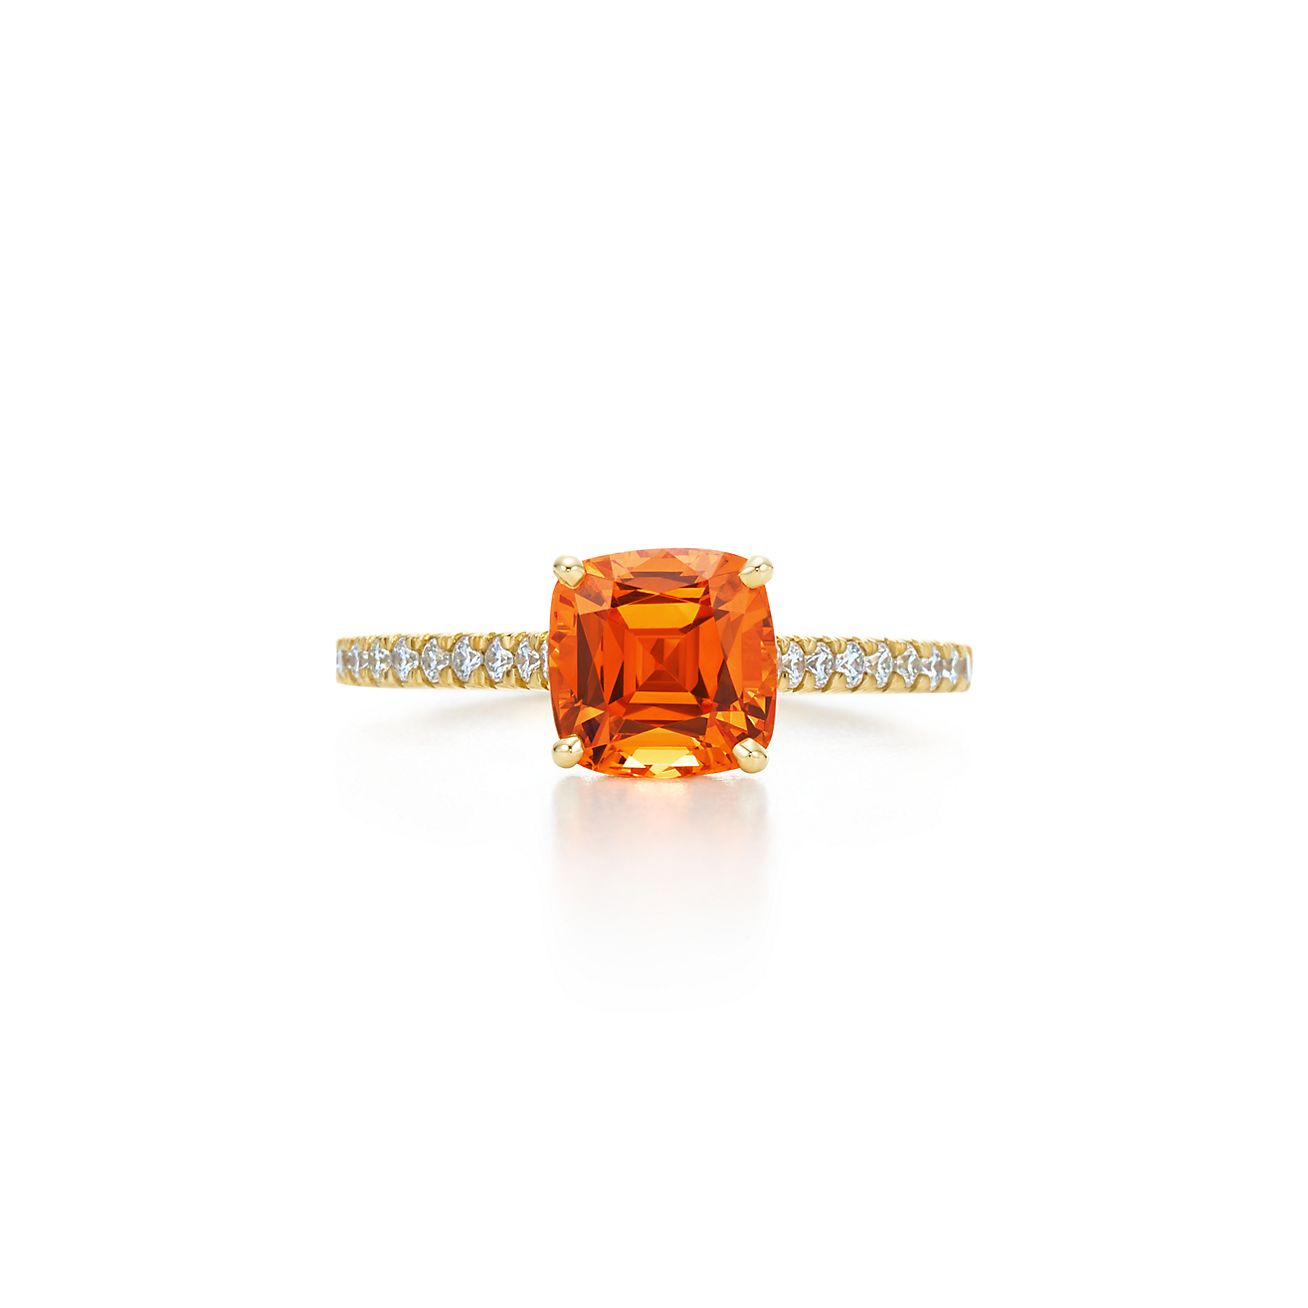 Tiffany Legacy® ring in 18k gold with 